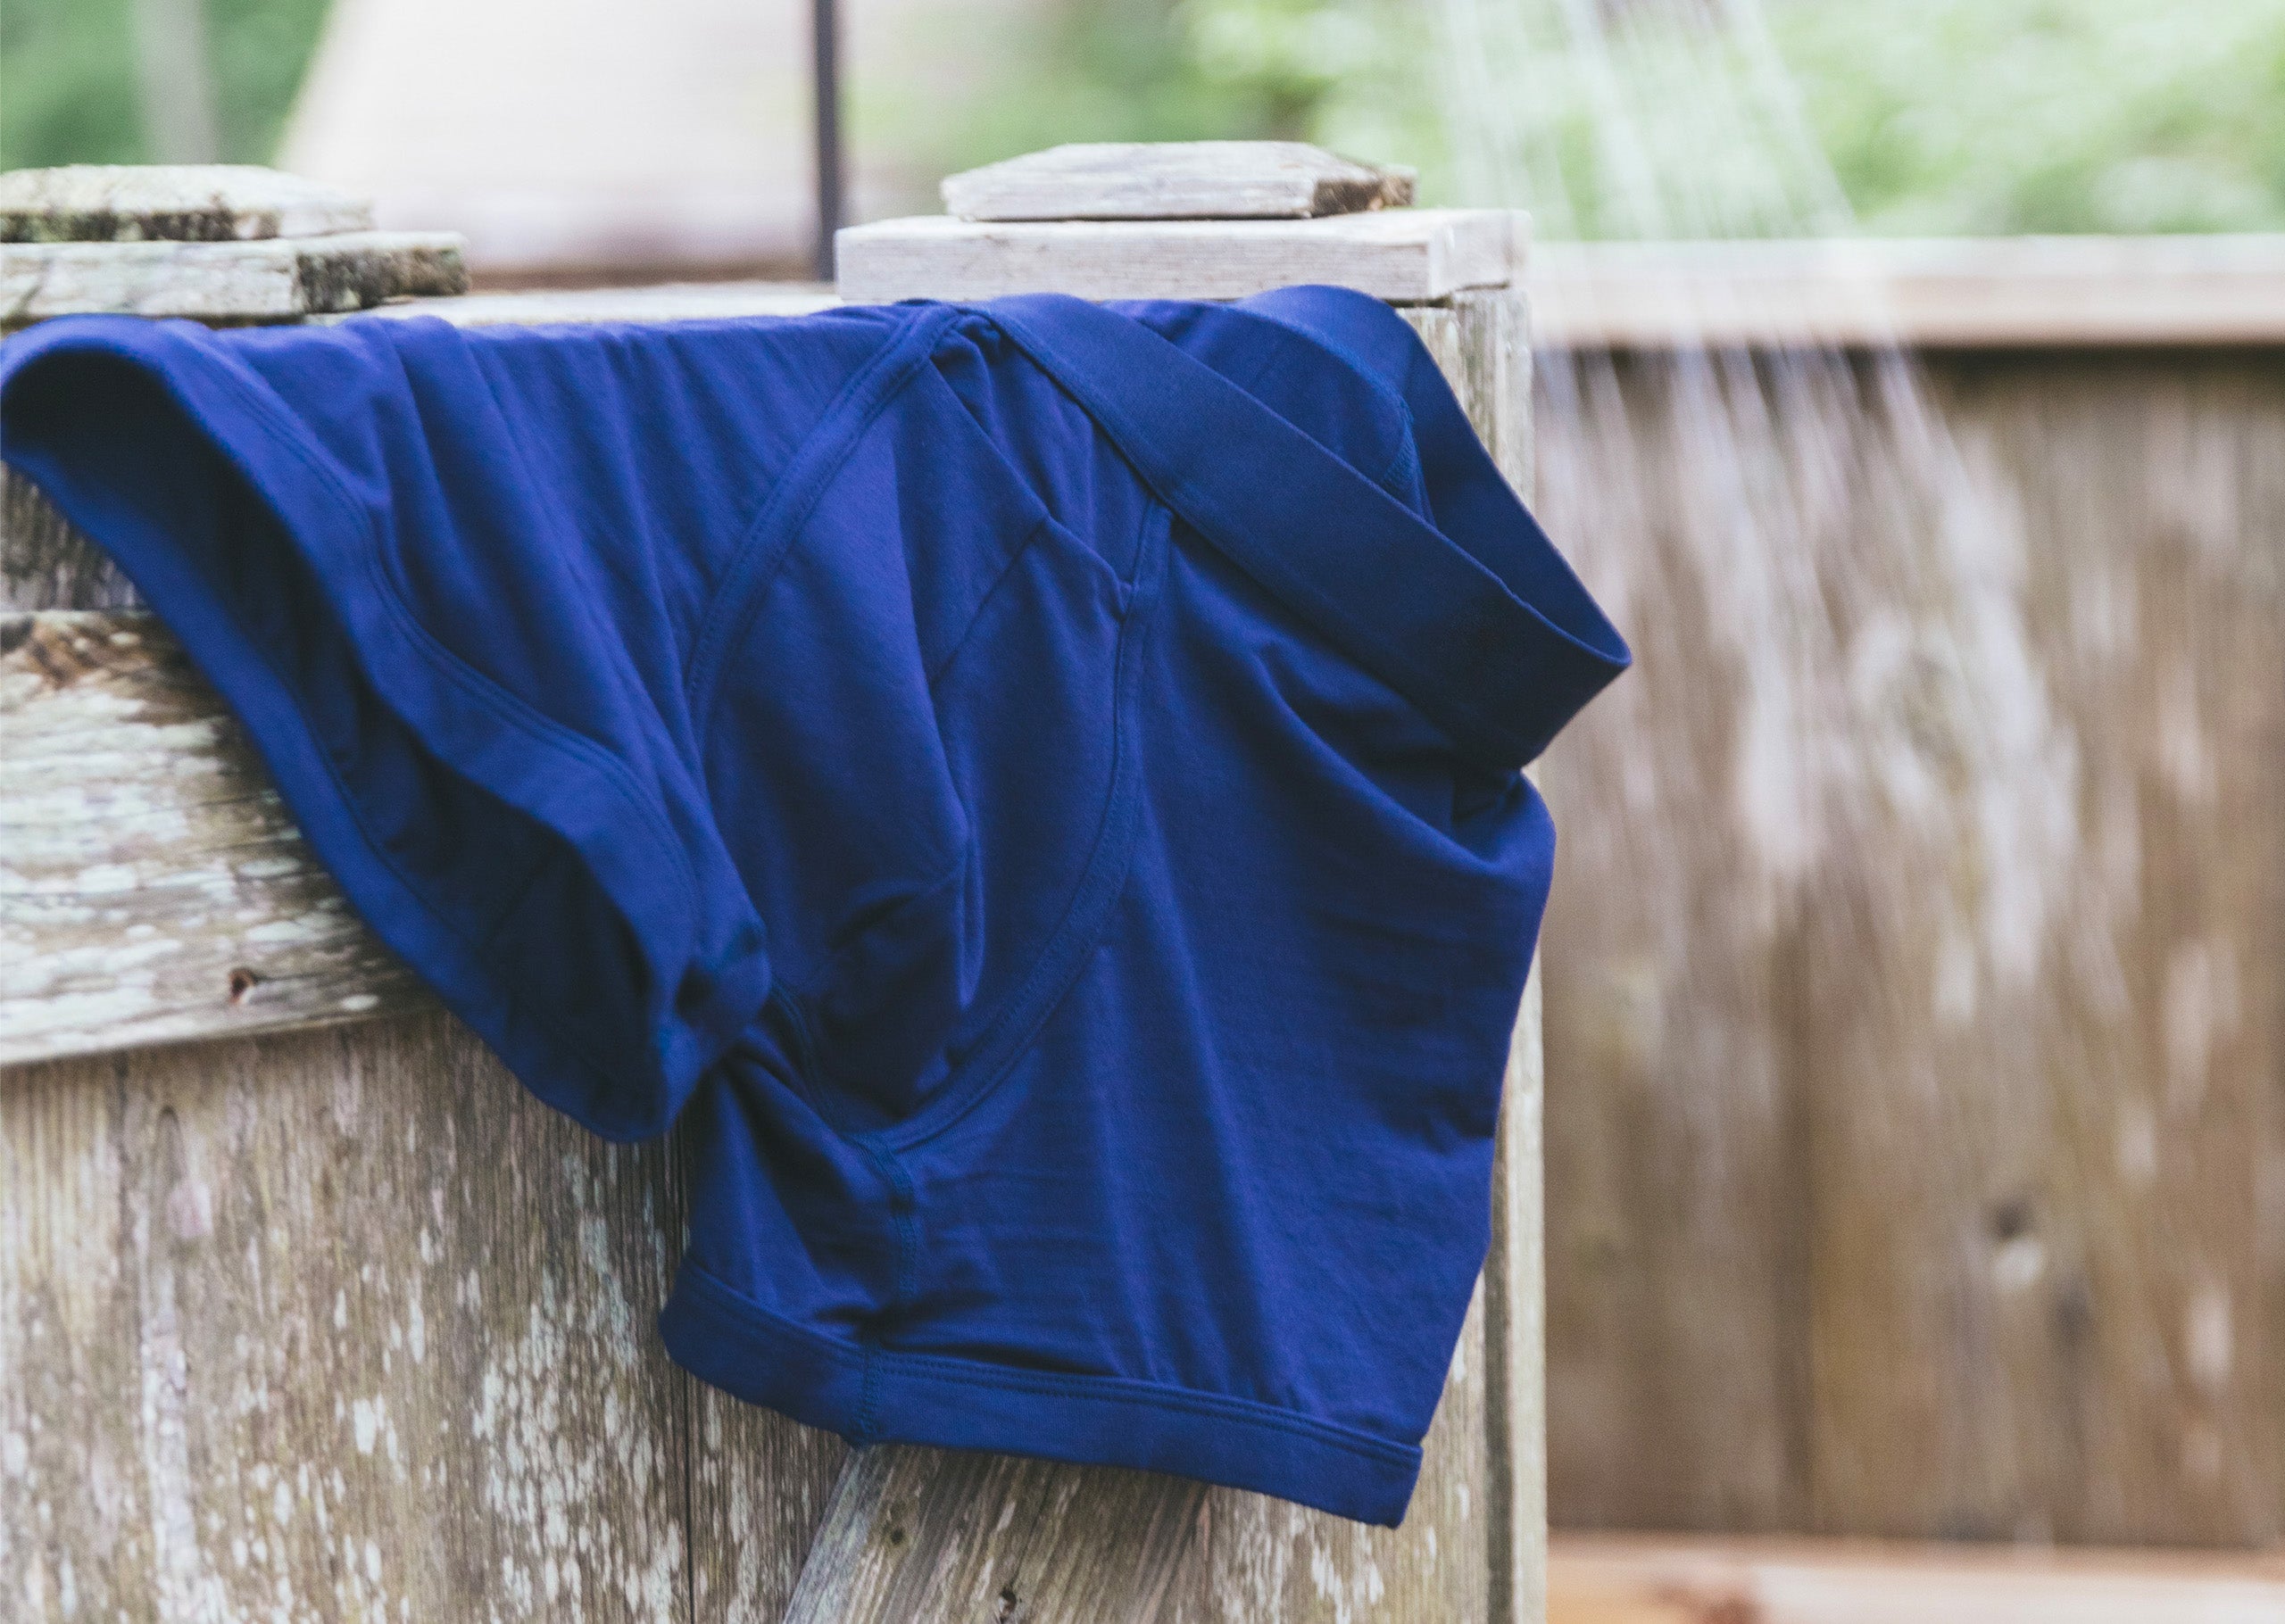 Pair of blue boxer briefs sitting on the sider of an outdoor shower.